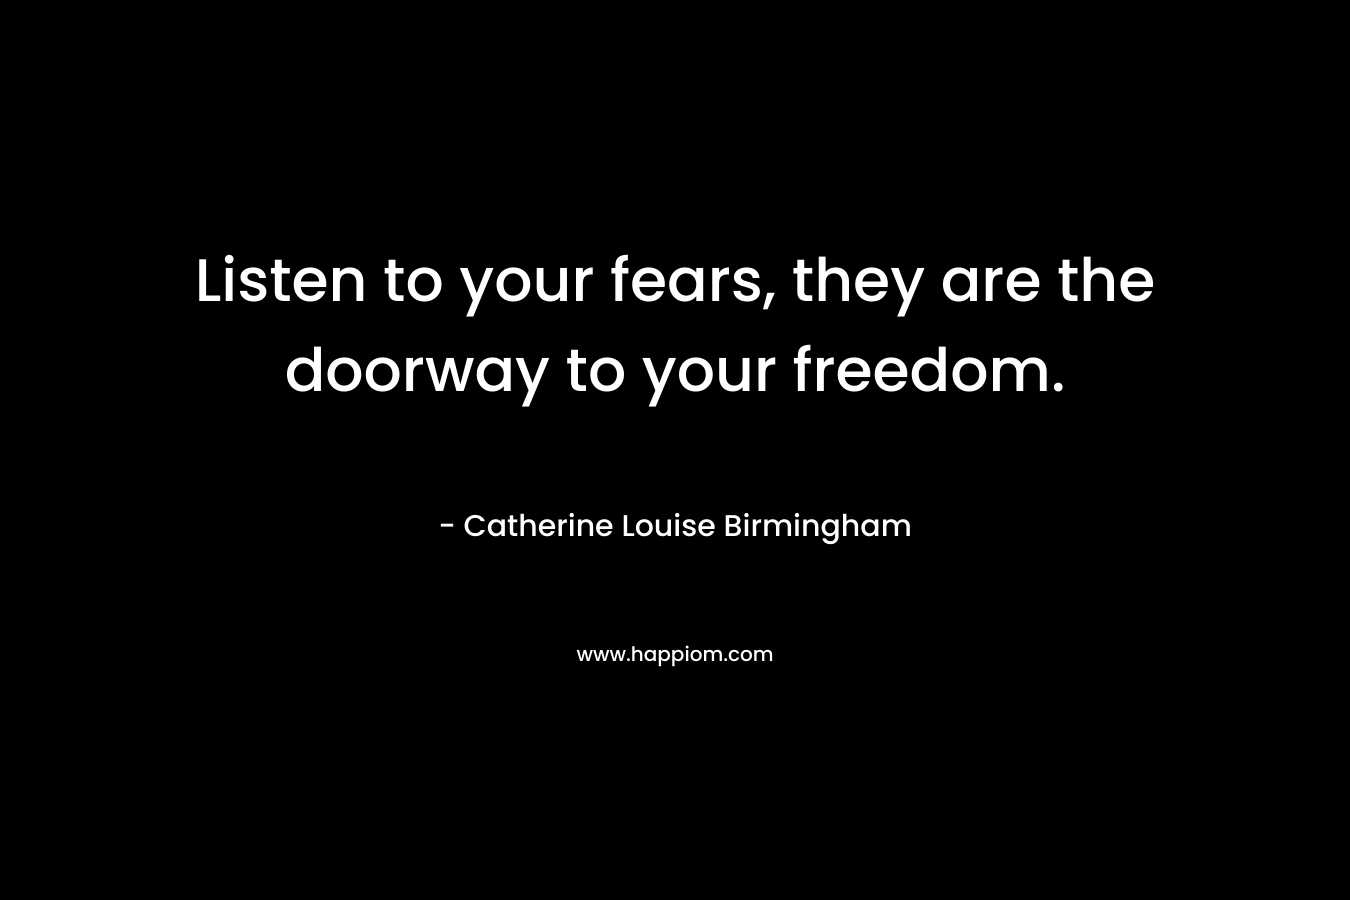 Listen to your fears, they are the doorway to your freedom.